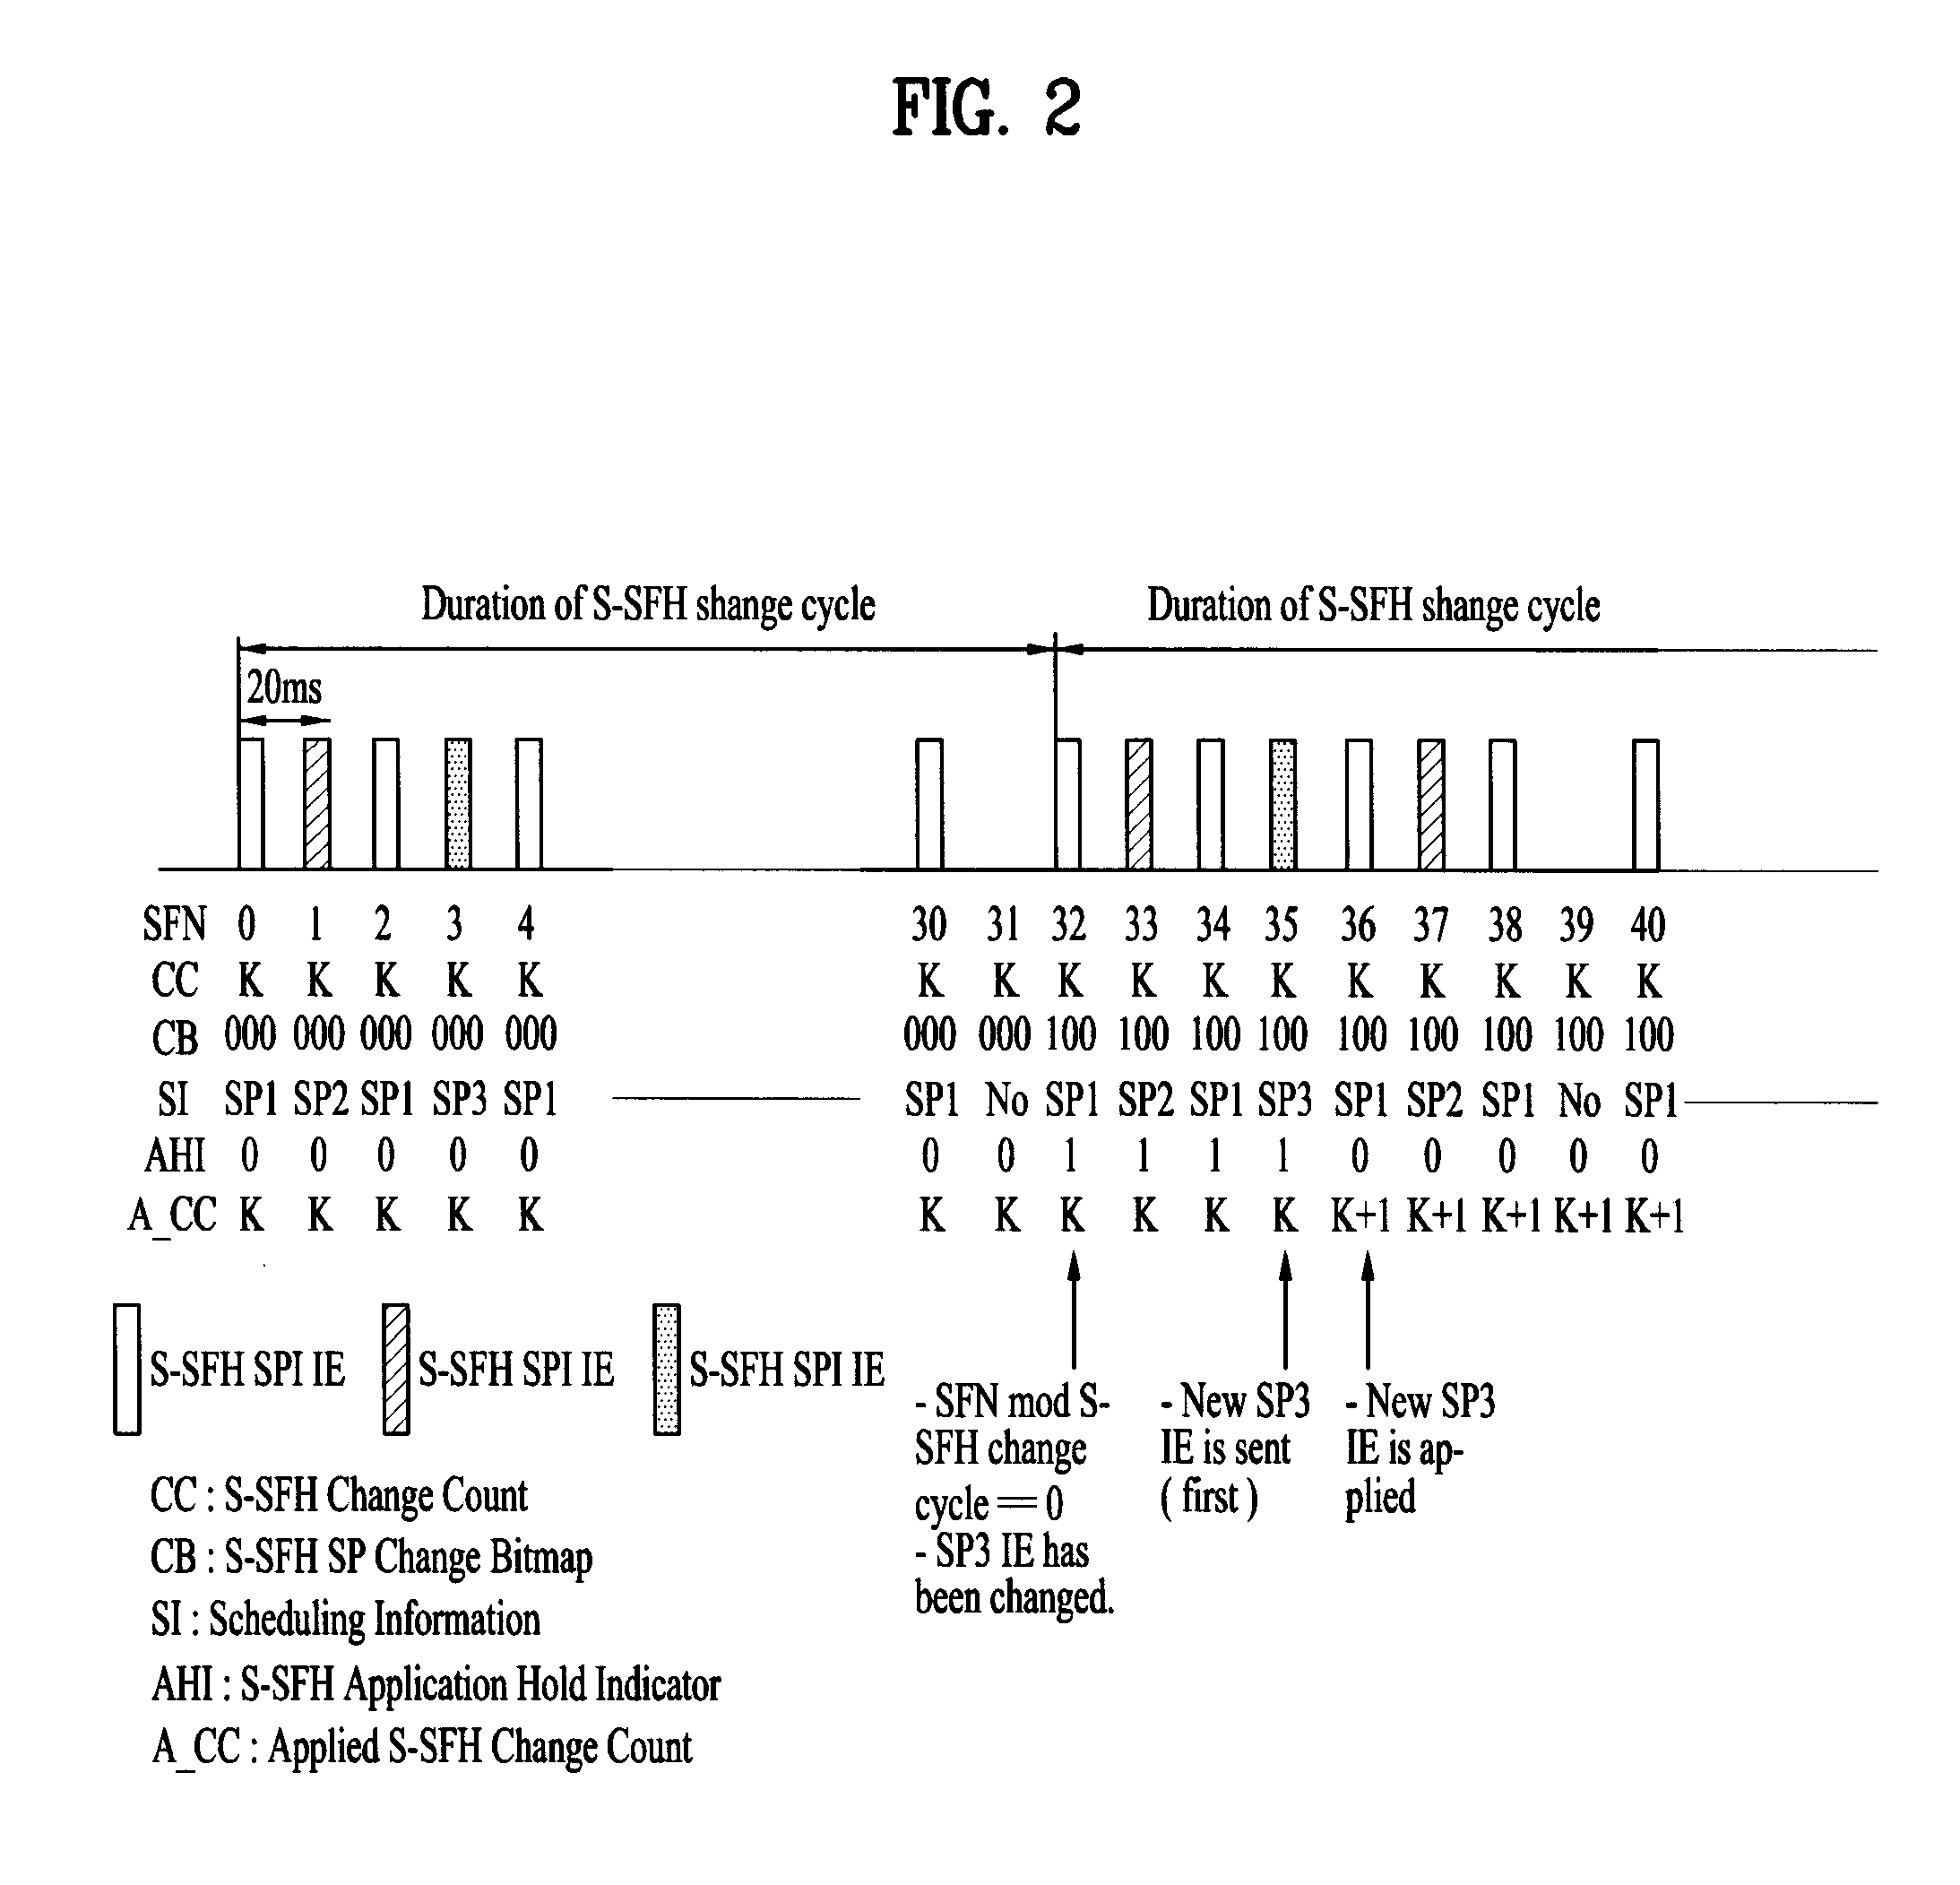 Apparatus for updating information of an m2m device in a wireless communication system and method thereof